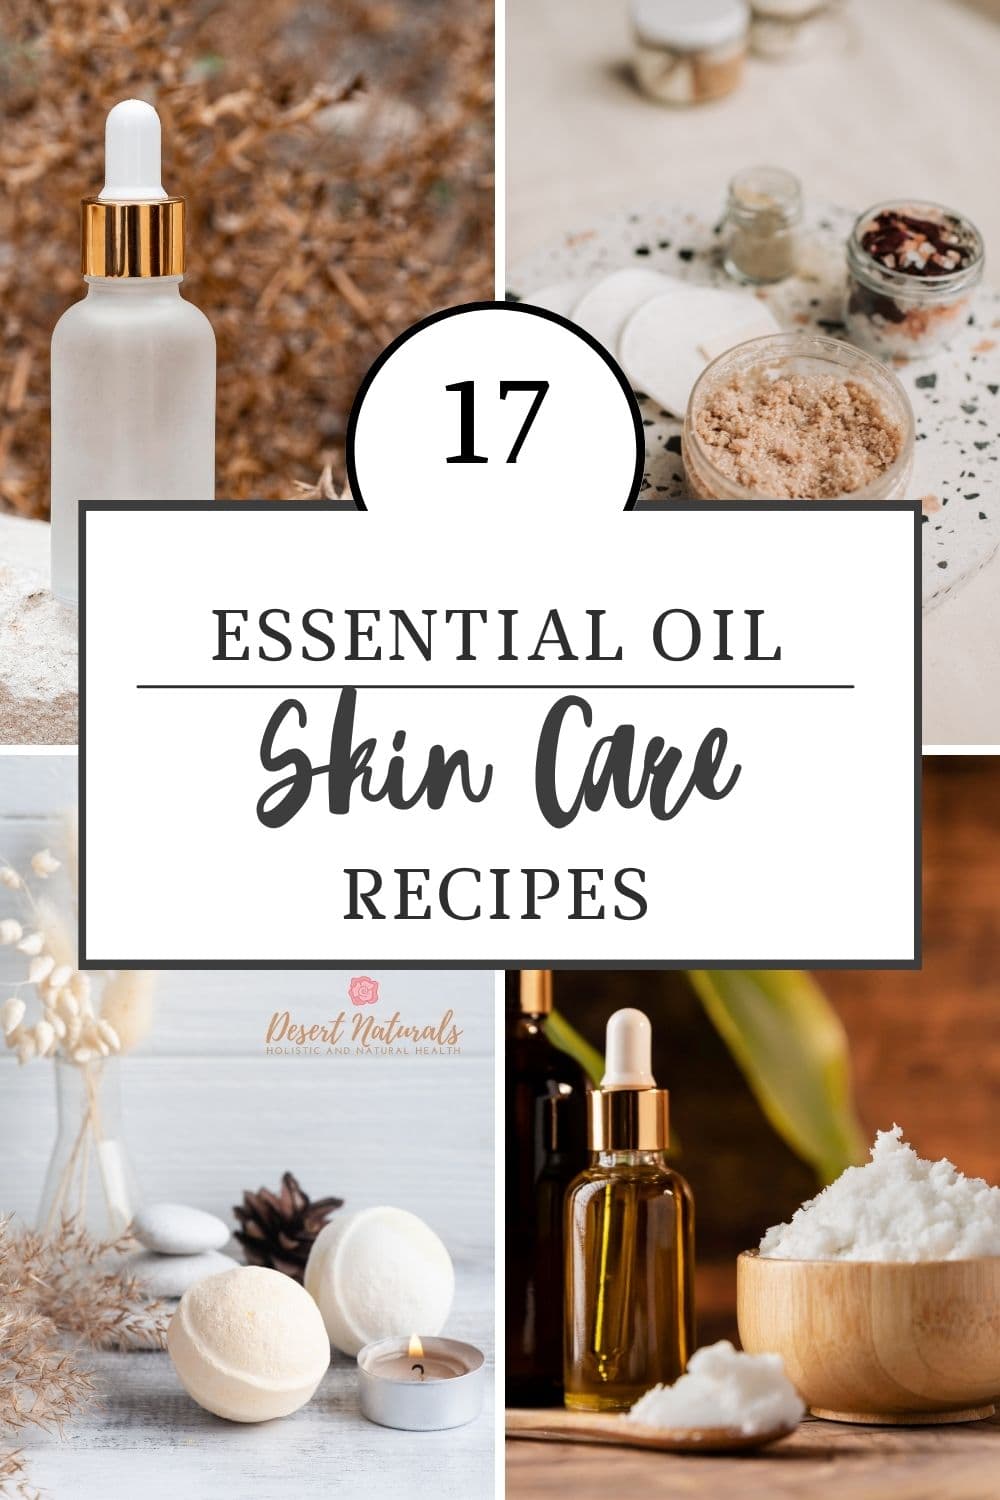 4 beautiful images of homemade essential oil skincare products with text